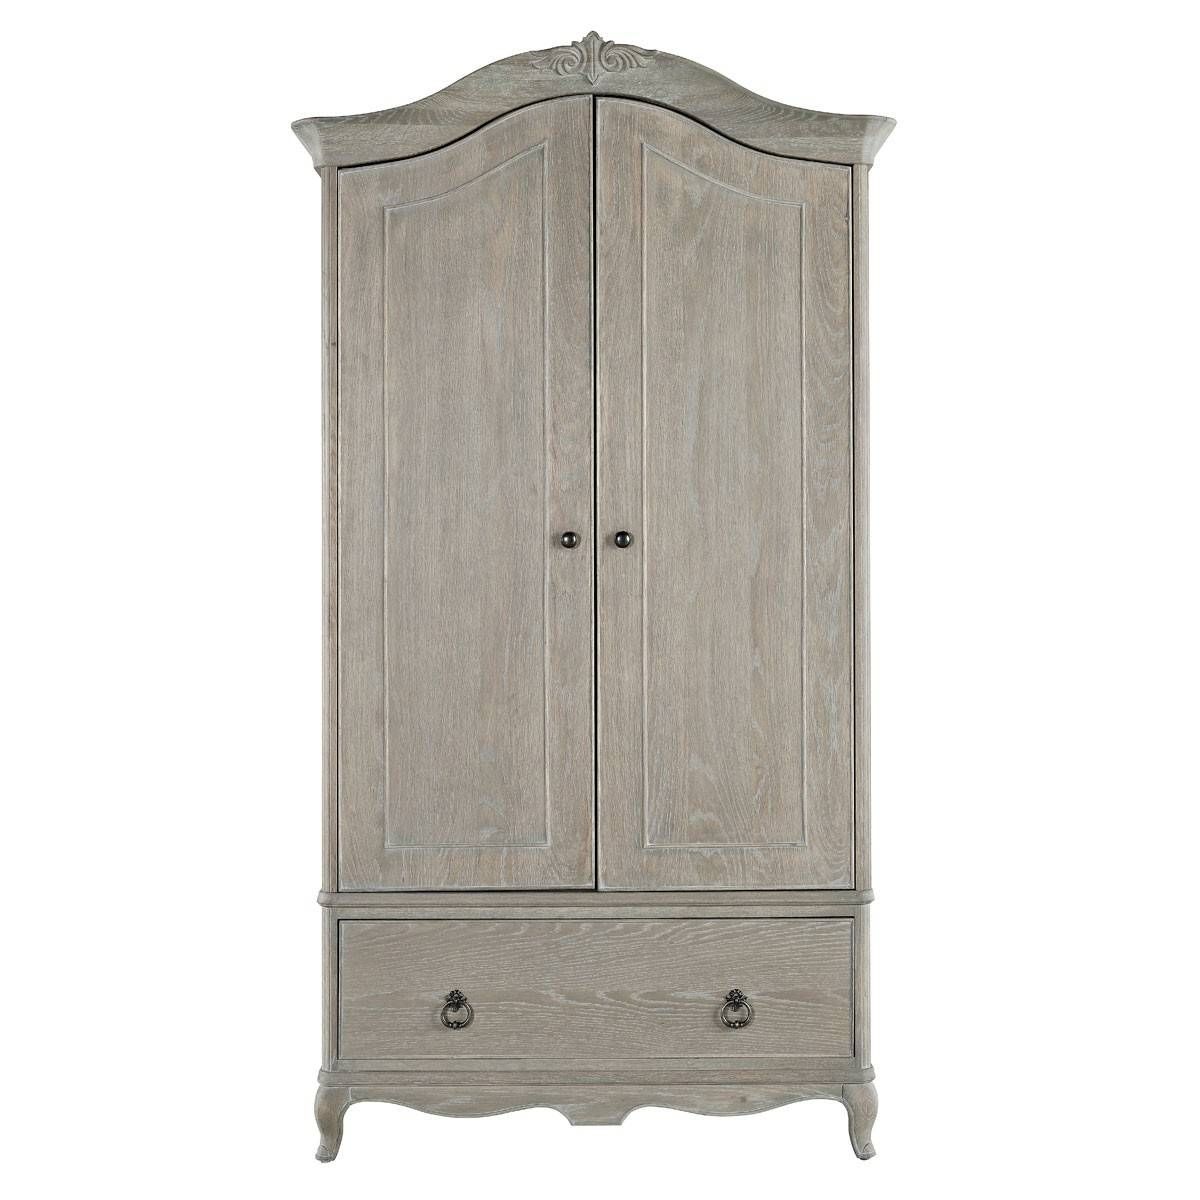 Chateau French Large Armoire | White Painted French Style Armoire Within White French Style Wardrobes (View 10 of 15)